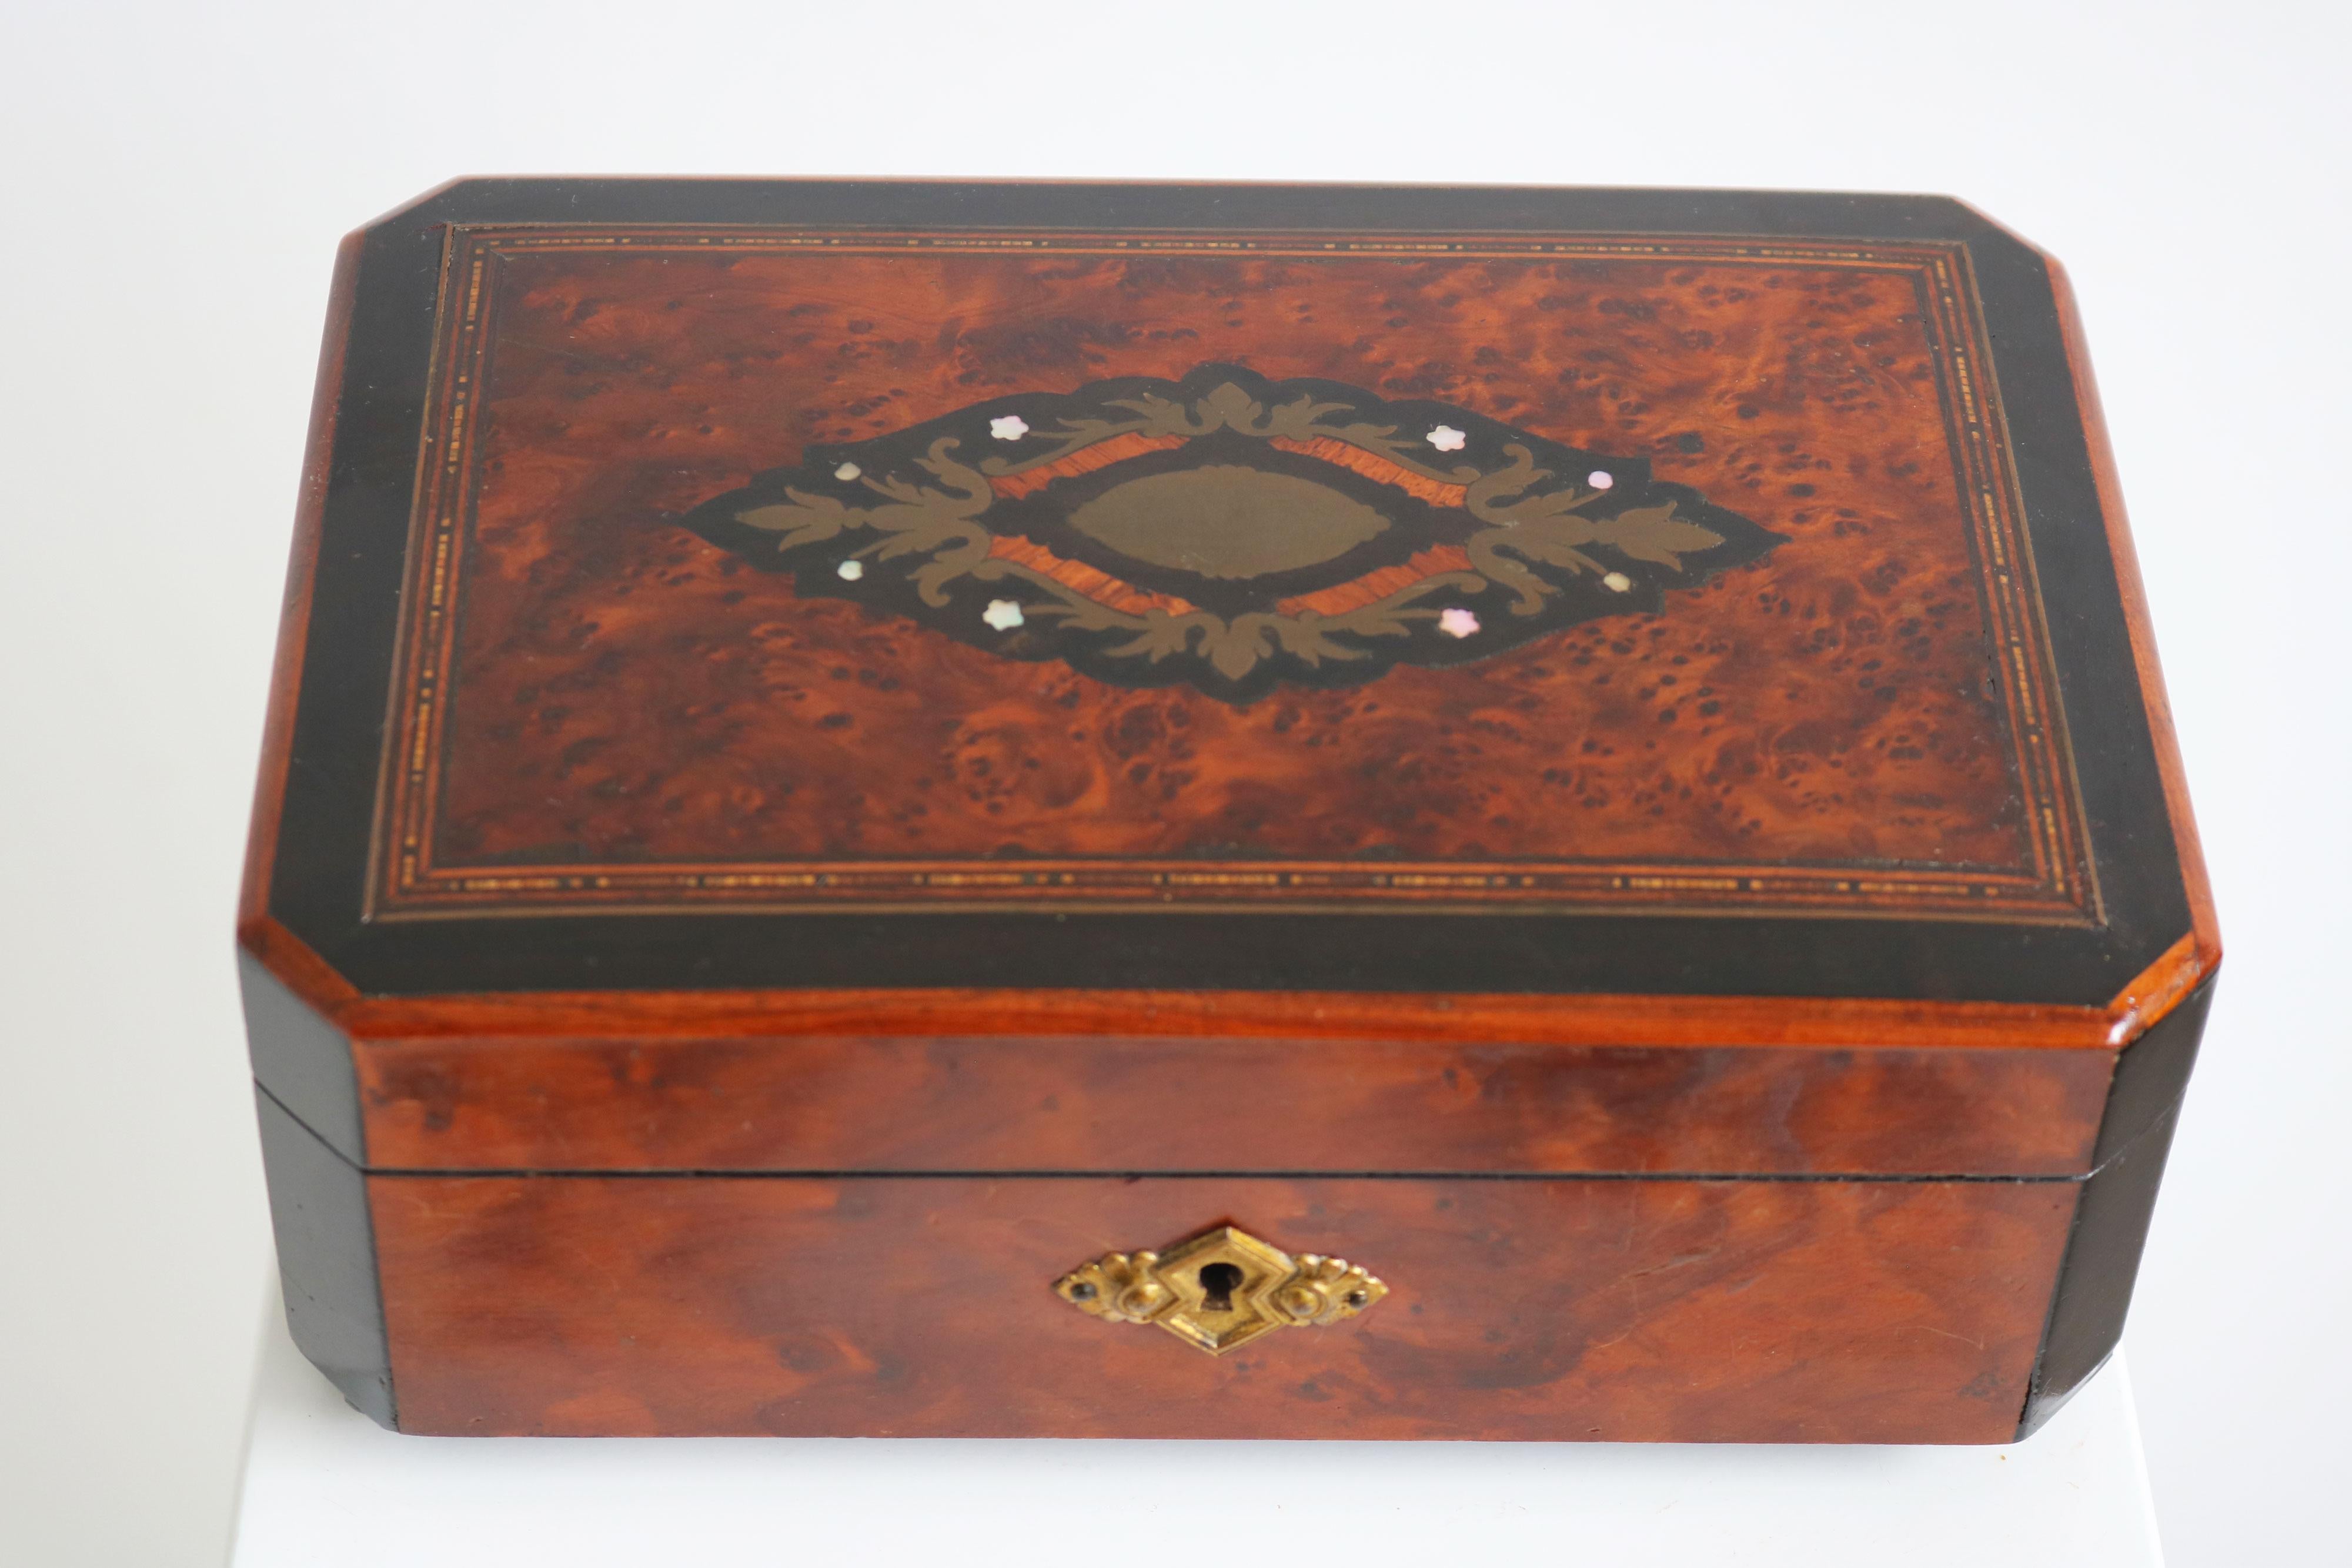 Marvelous & luxurious ! This most rare 19th century French antique Napoleon III jewelry box.  
Great large size jewelry box that can be used to store your jewelry in style!  Very rare with original bordeaux red fabric interior that just oozes